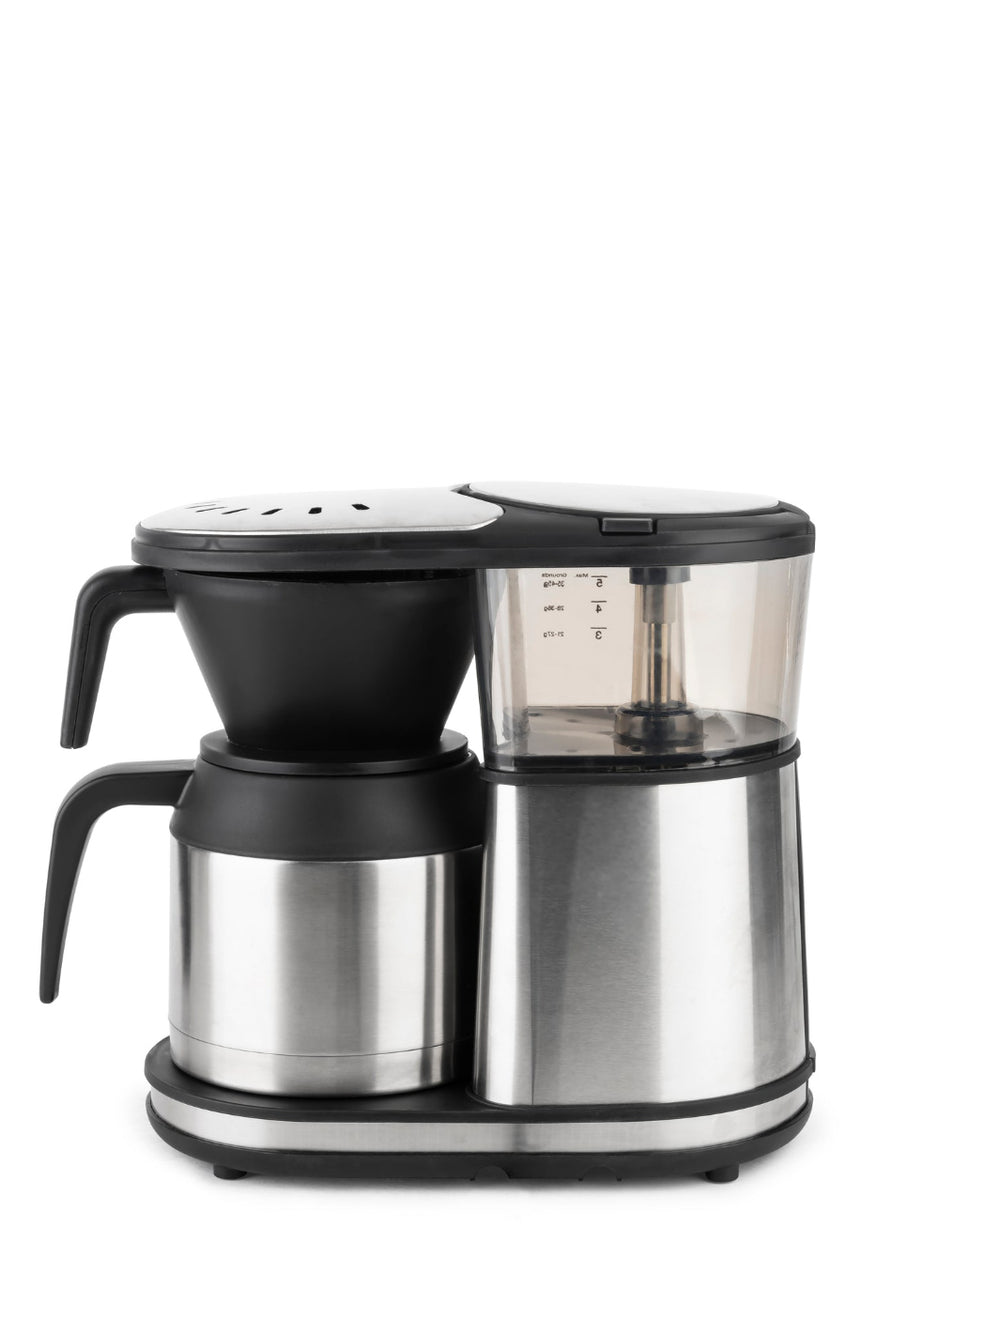 https://cdn.shopify.com/s/files/1/2404/0687/products/bonavita_thermal-carafe-coffee-brewer_5-cup_rear-view.jpg?v=1669141171&width=1000